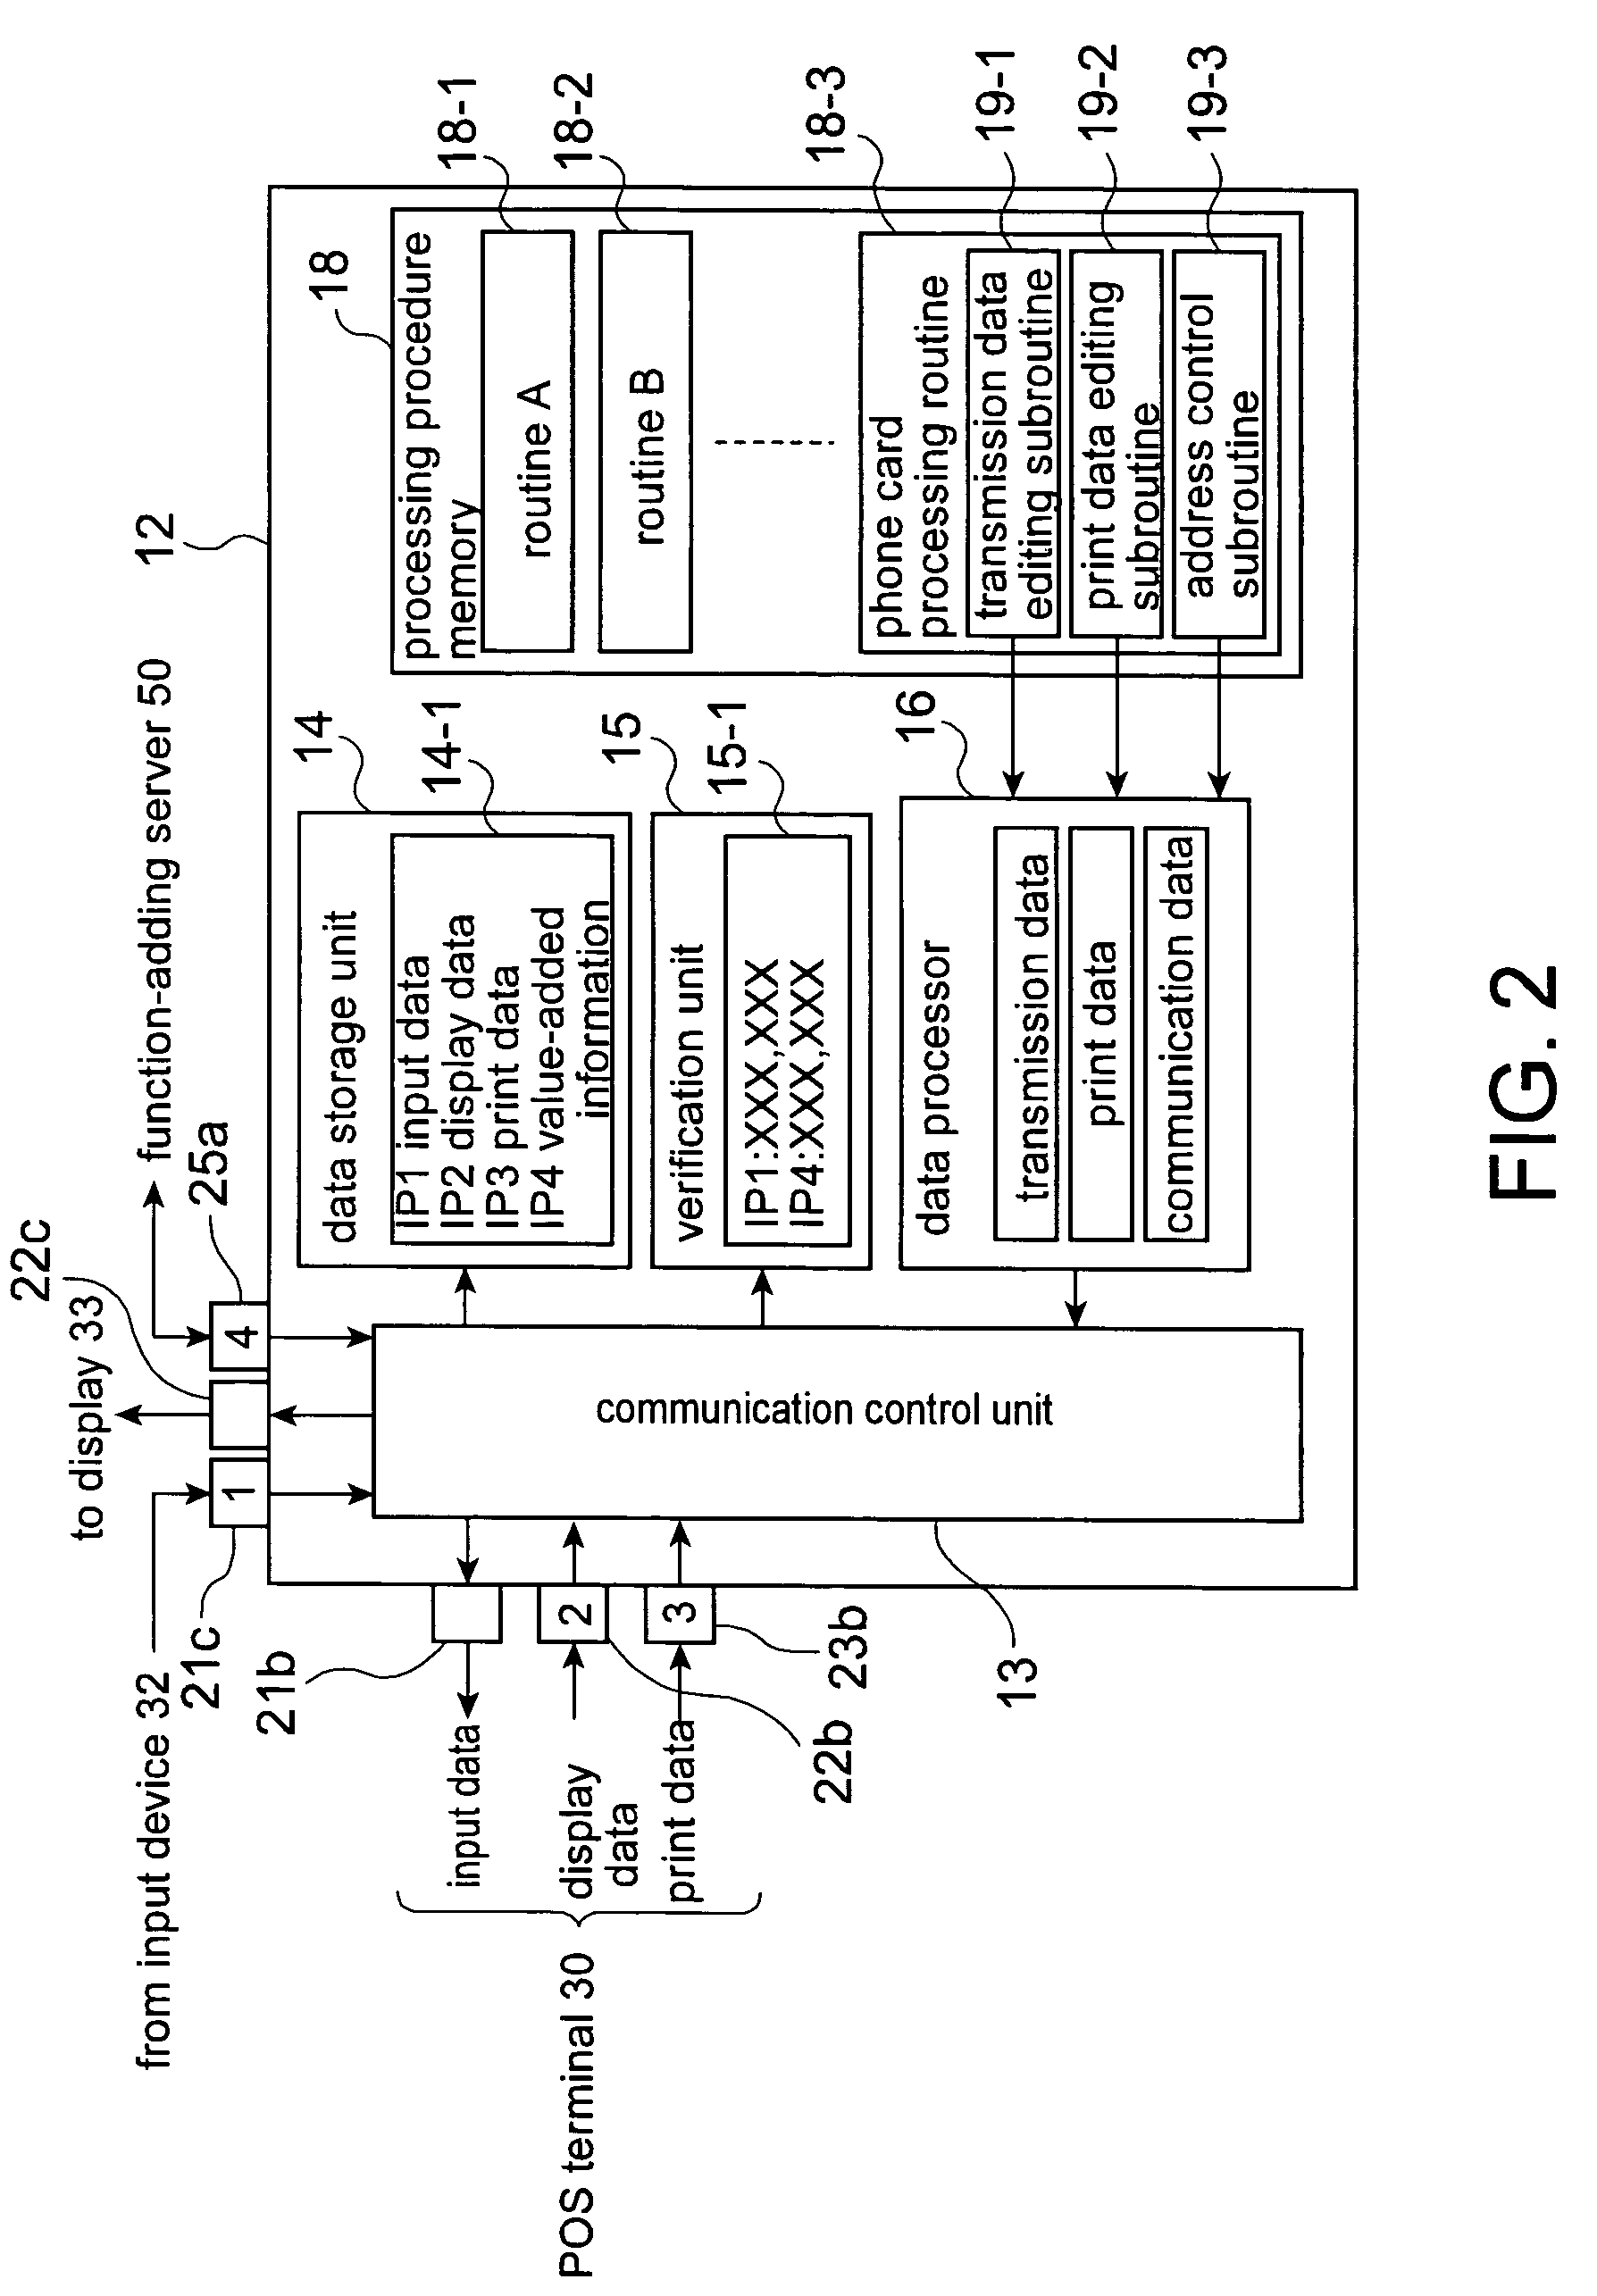 POS system, input/output control apparatus for use in a POS system, and method